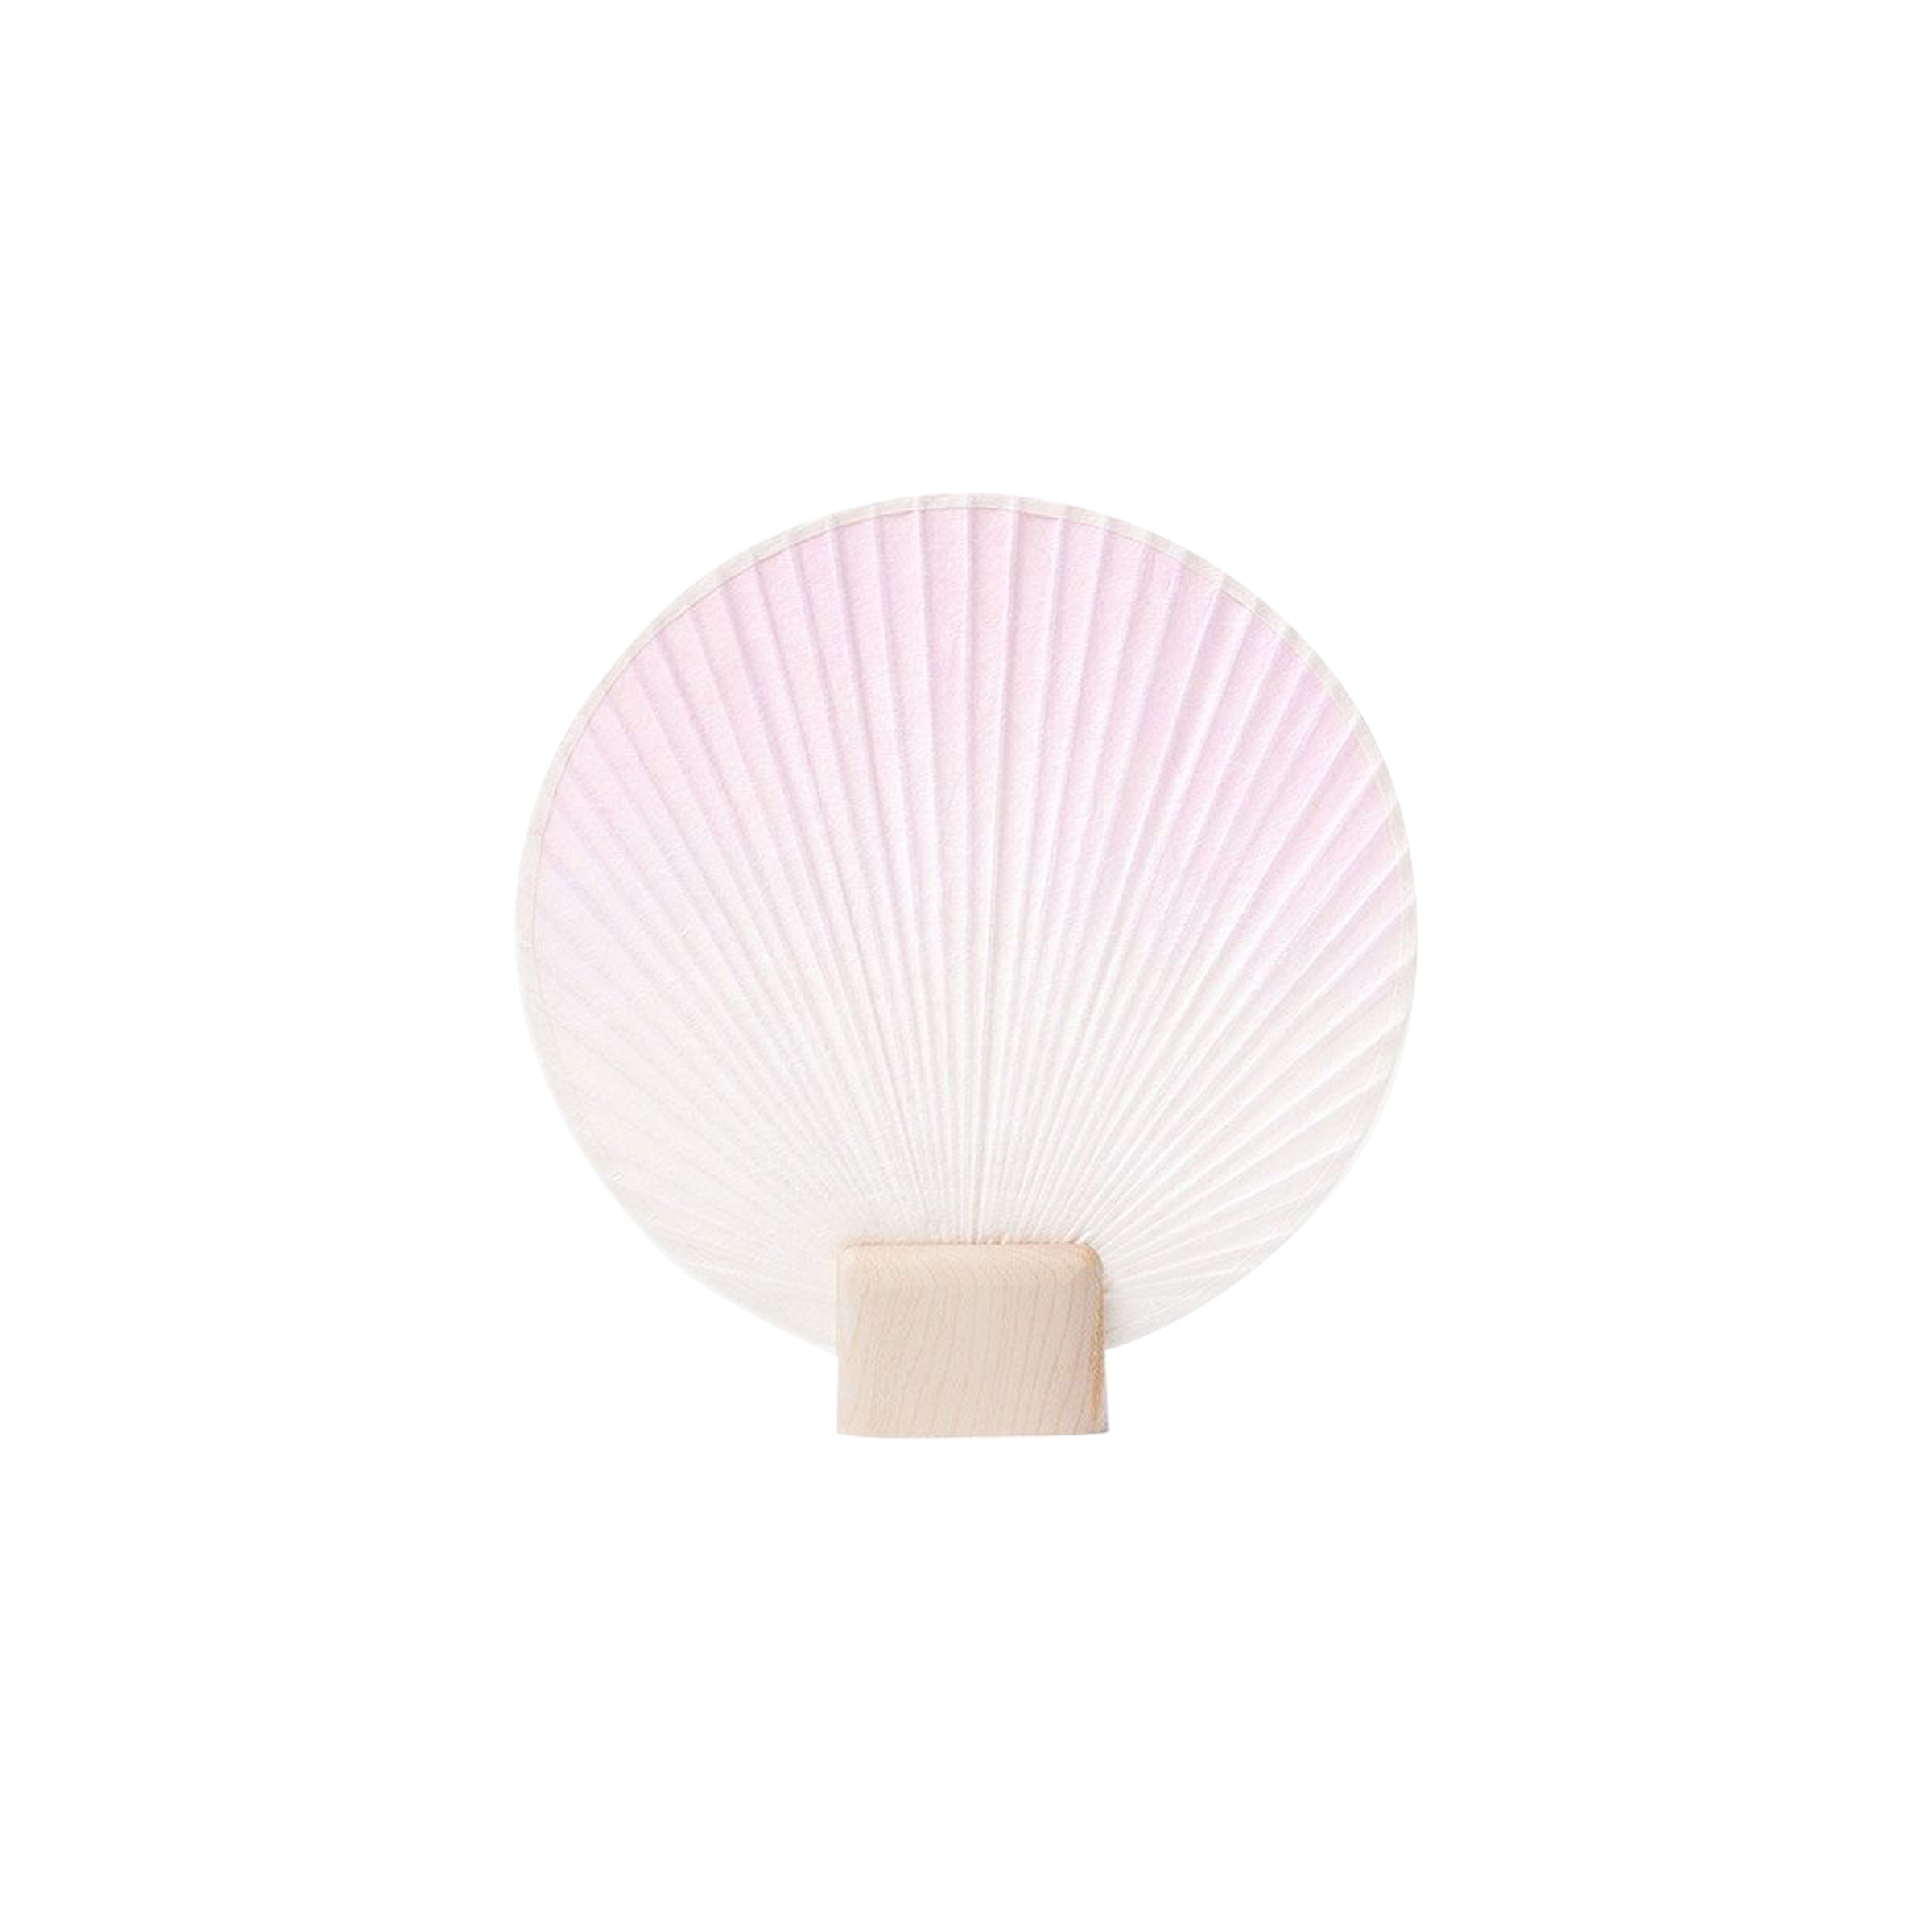 KHJ Studio Hand Crafted Fan Round Small in Pink